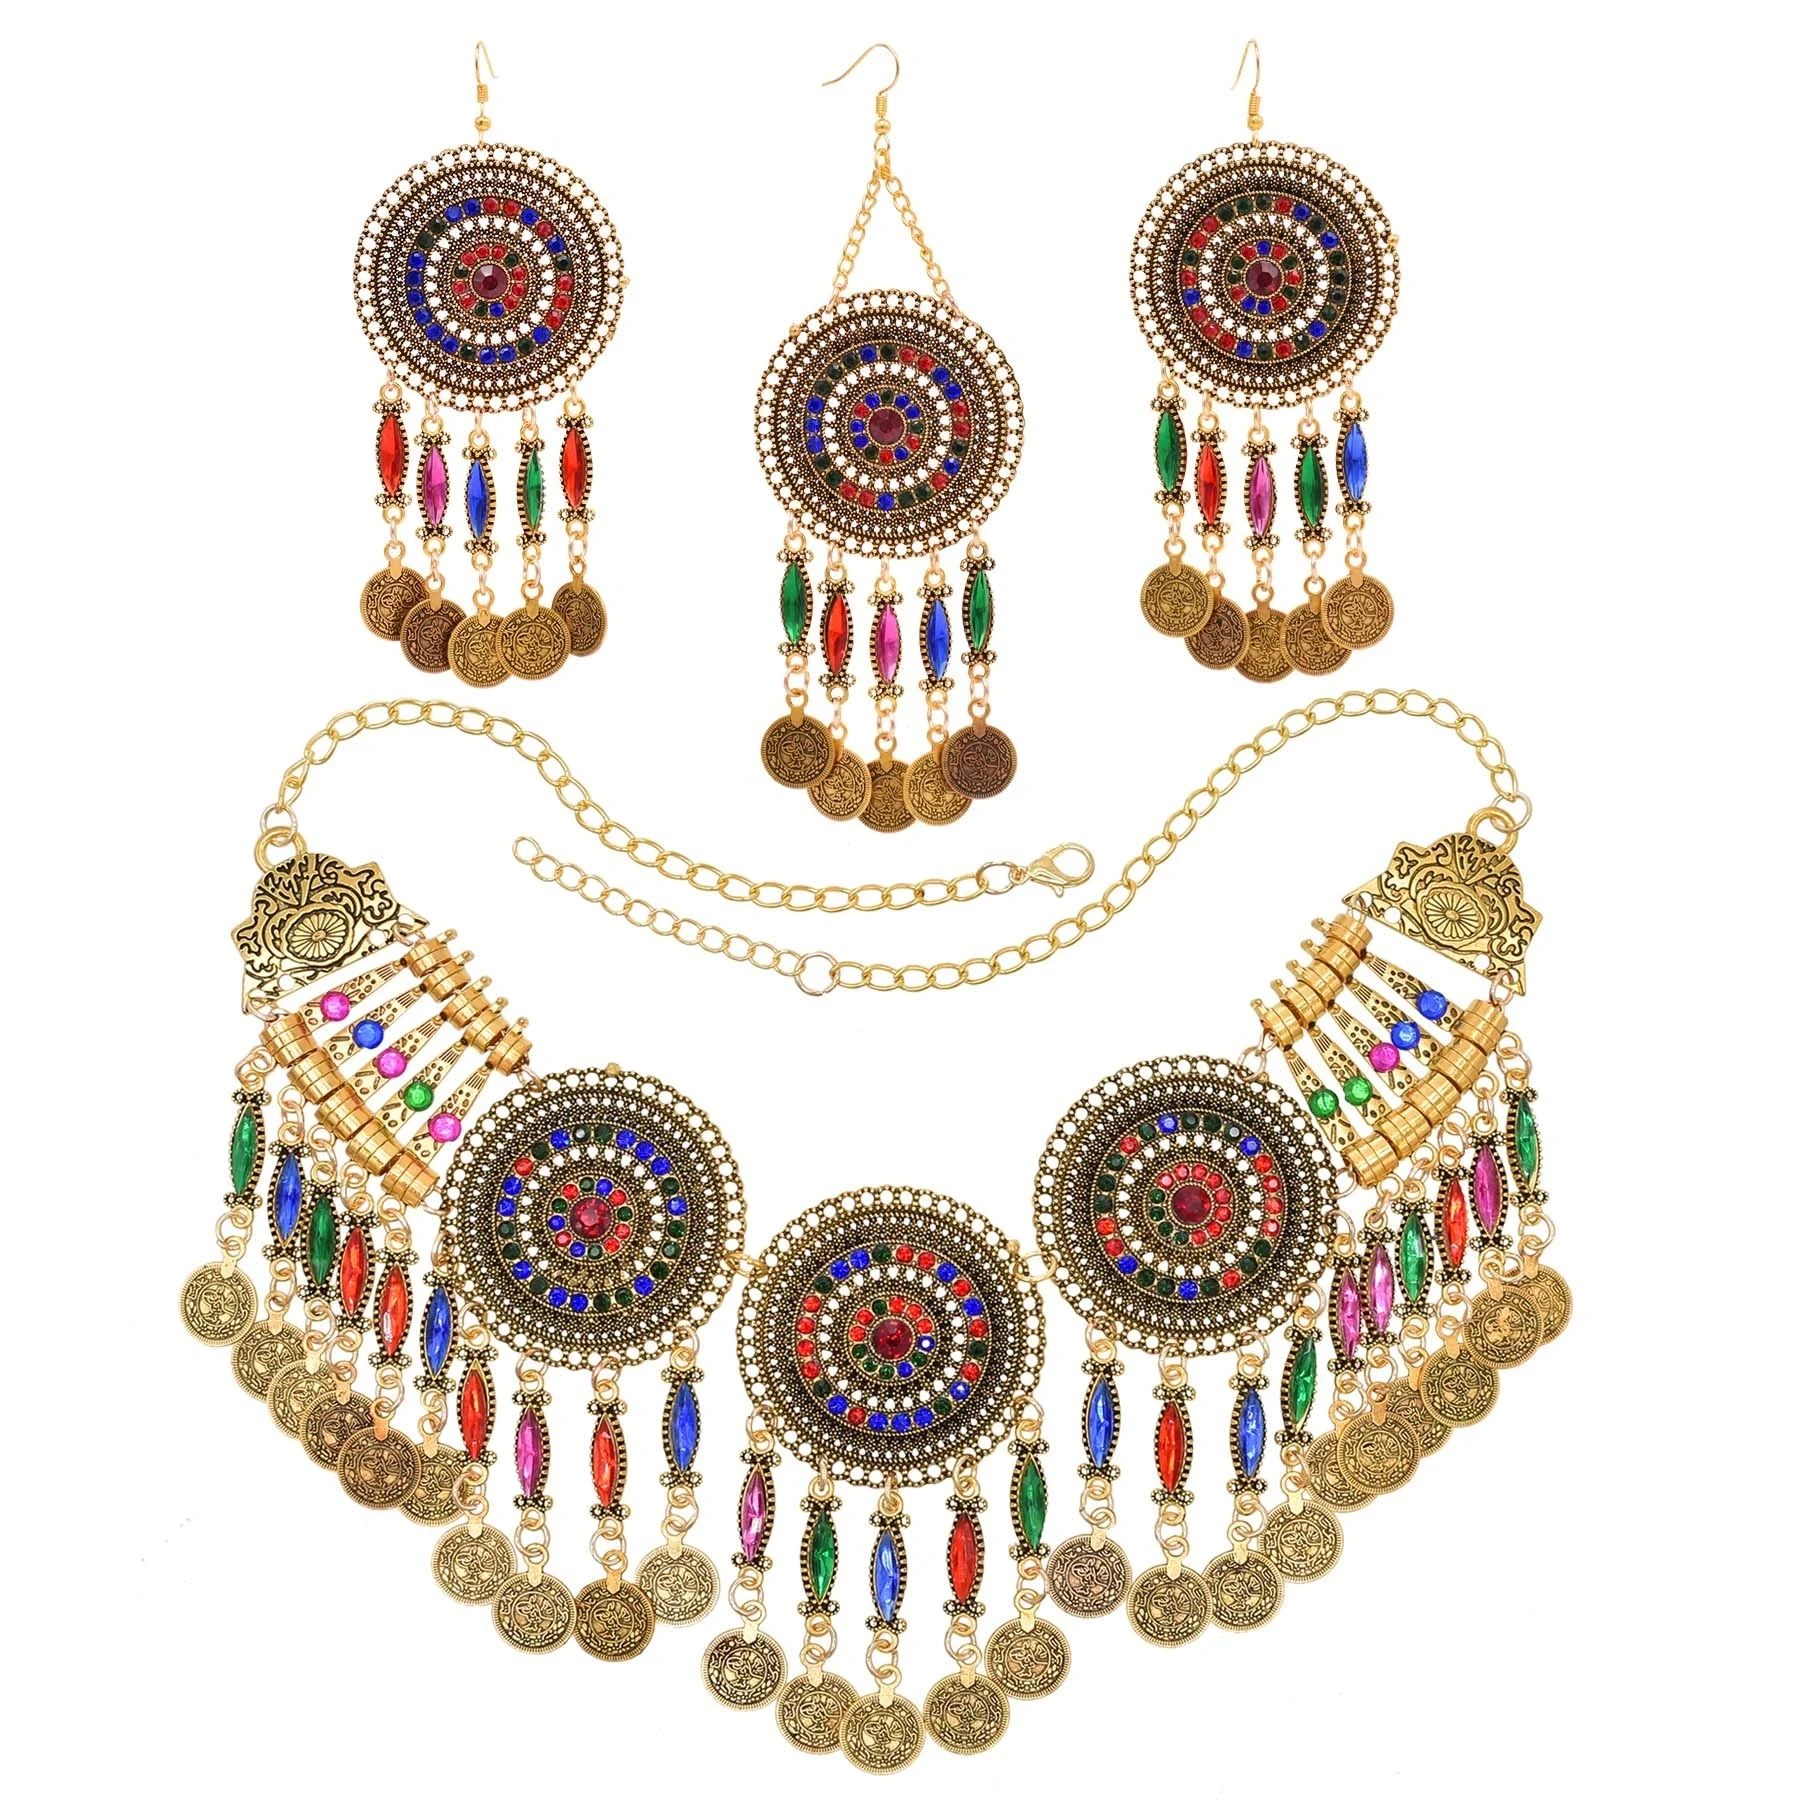 

Vintage Colorful Crystal Coins Tassel Earrings Necklace Hair Hook Gypsy Ethnic Tribal Bride Wedding Accessories Jewelry Sets